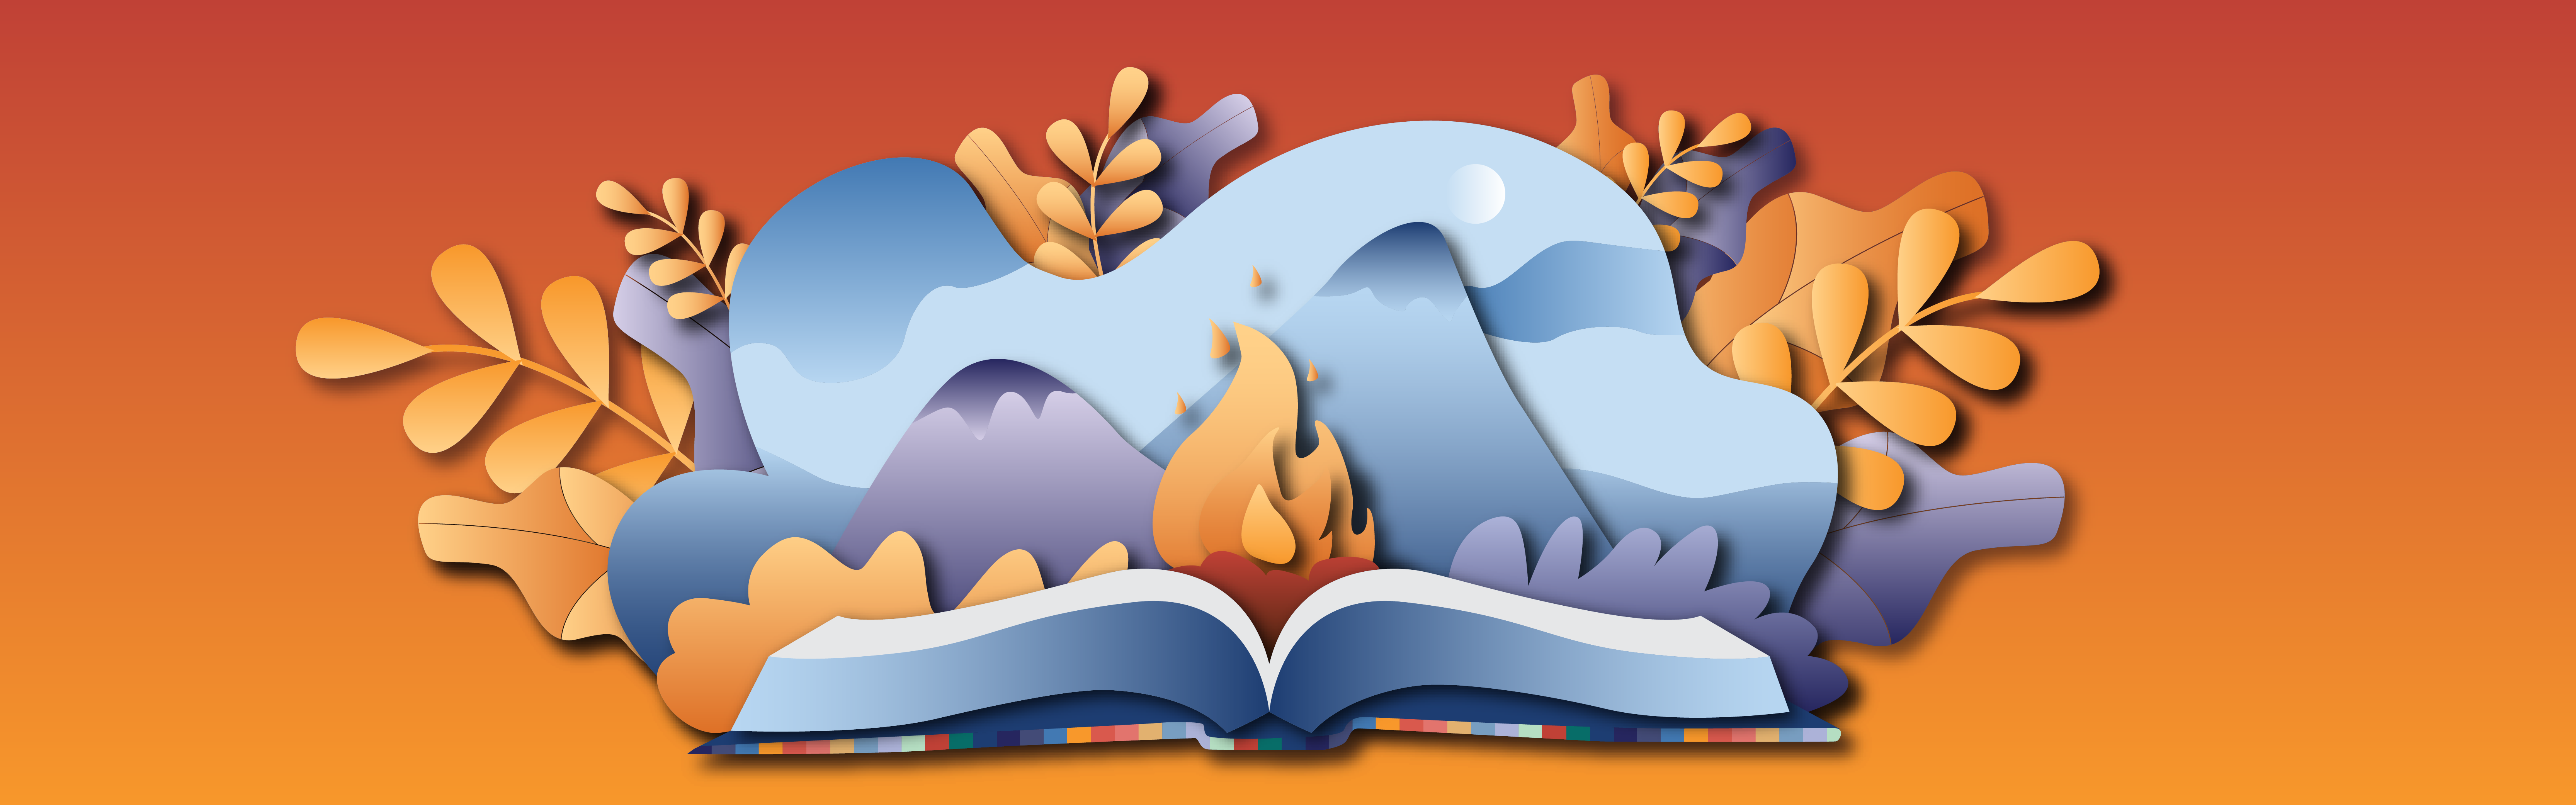 3D graphic of storybook with pop-up of a campfire, mountains, the night sky, and colorful foliage